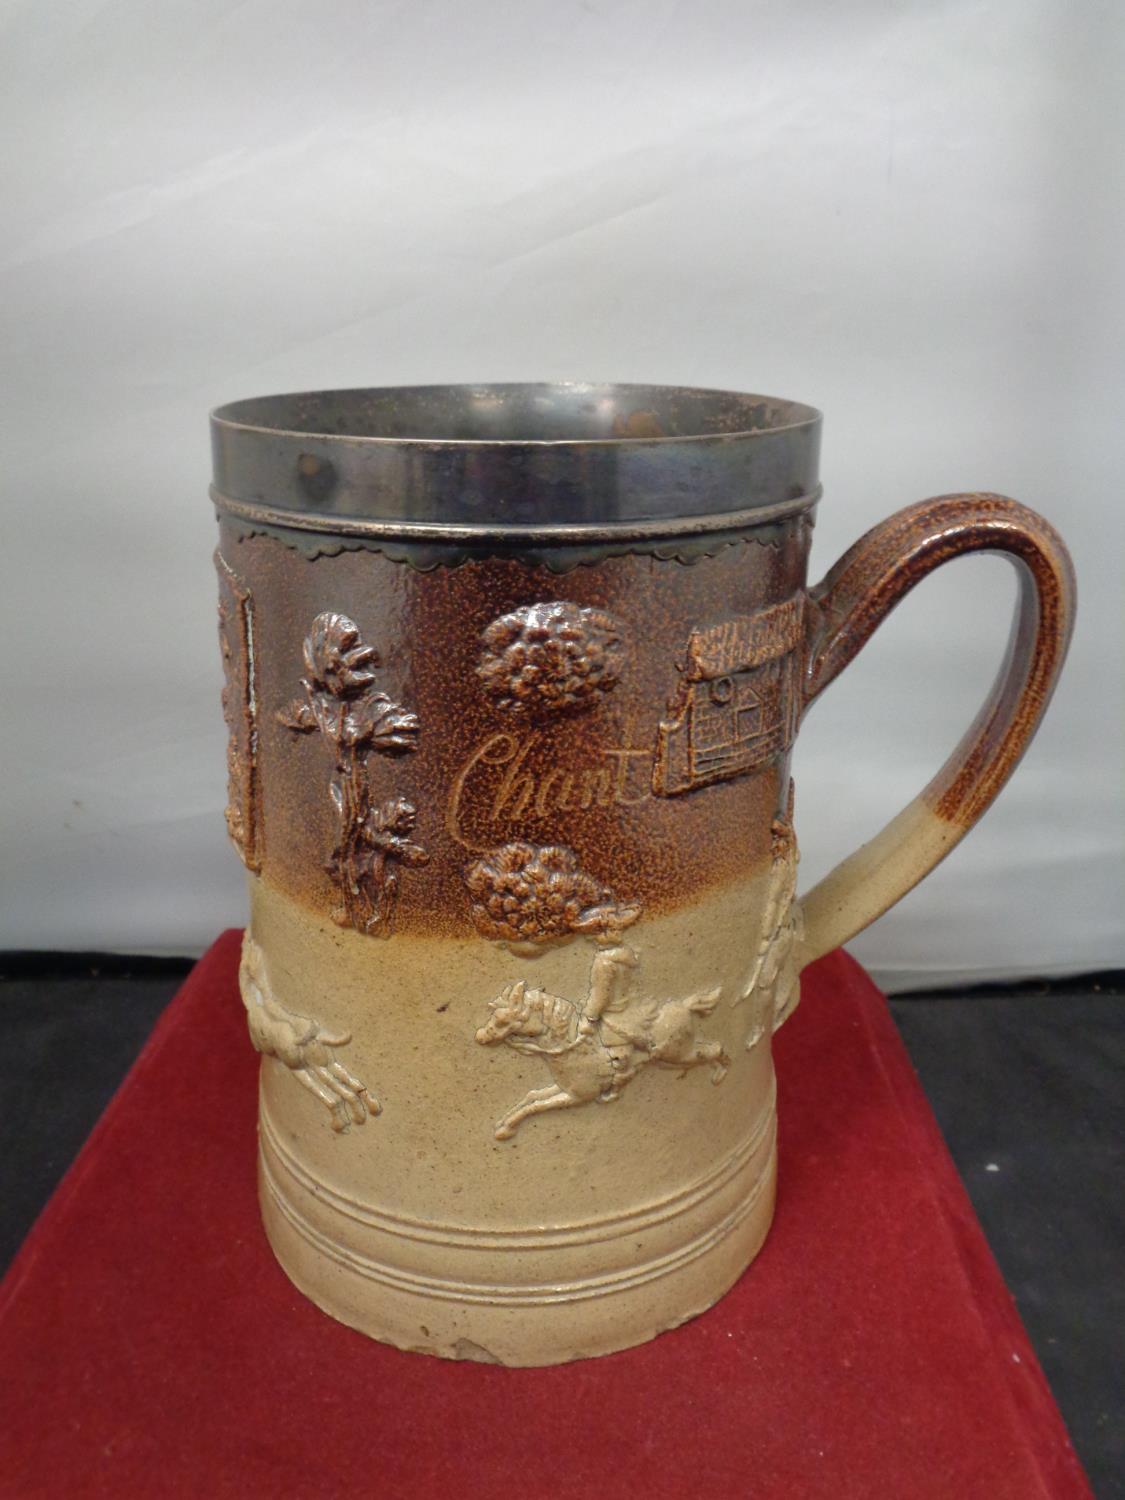 A VERY LARGE LAMBETH WARE TANKARD INSCRIBED MILLFORD 1735 WITH A WHITE METAL PROBABLY SILVER RIM